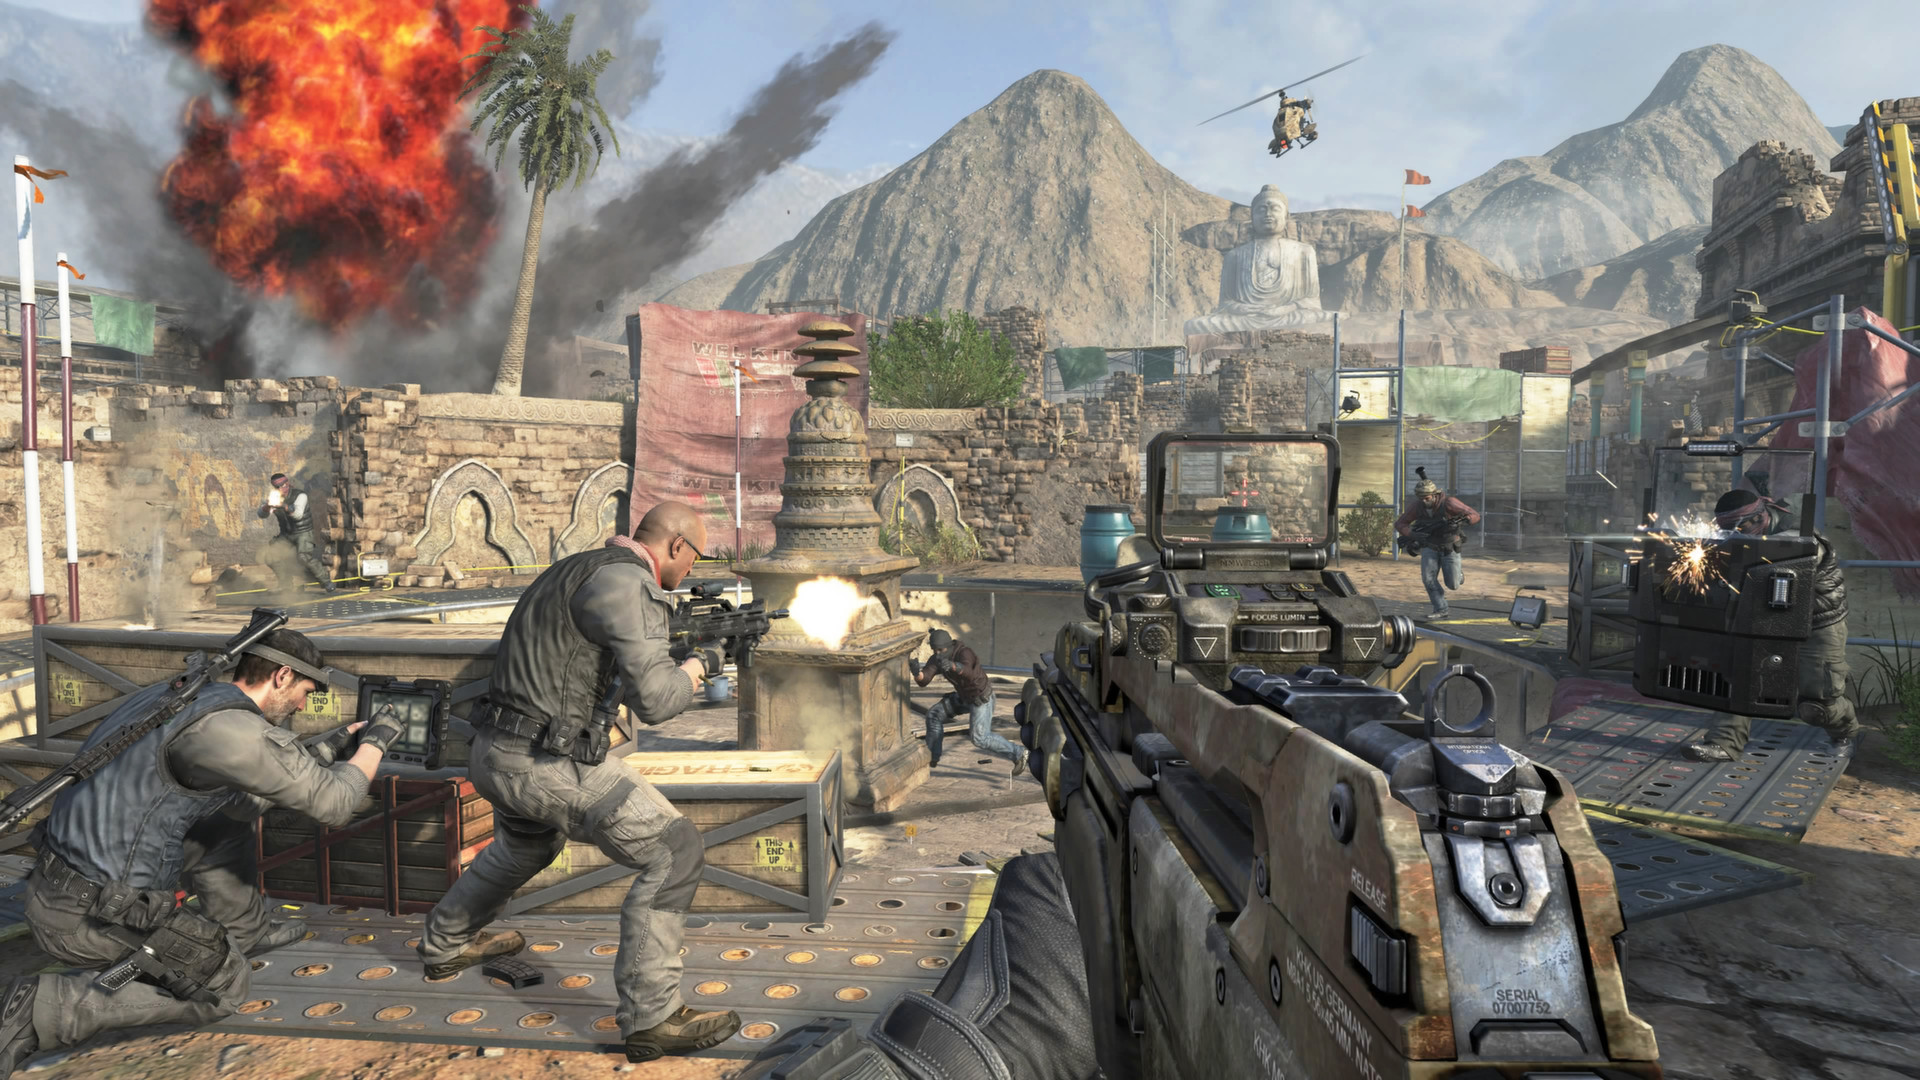 Call of Duty®: Black Ops II - Uprising on Steam